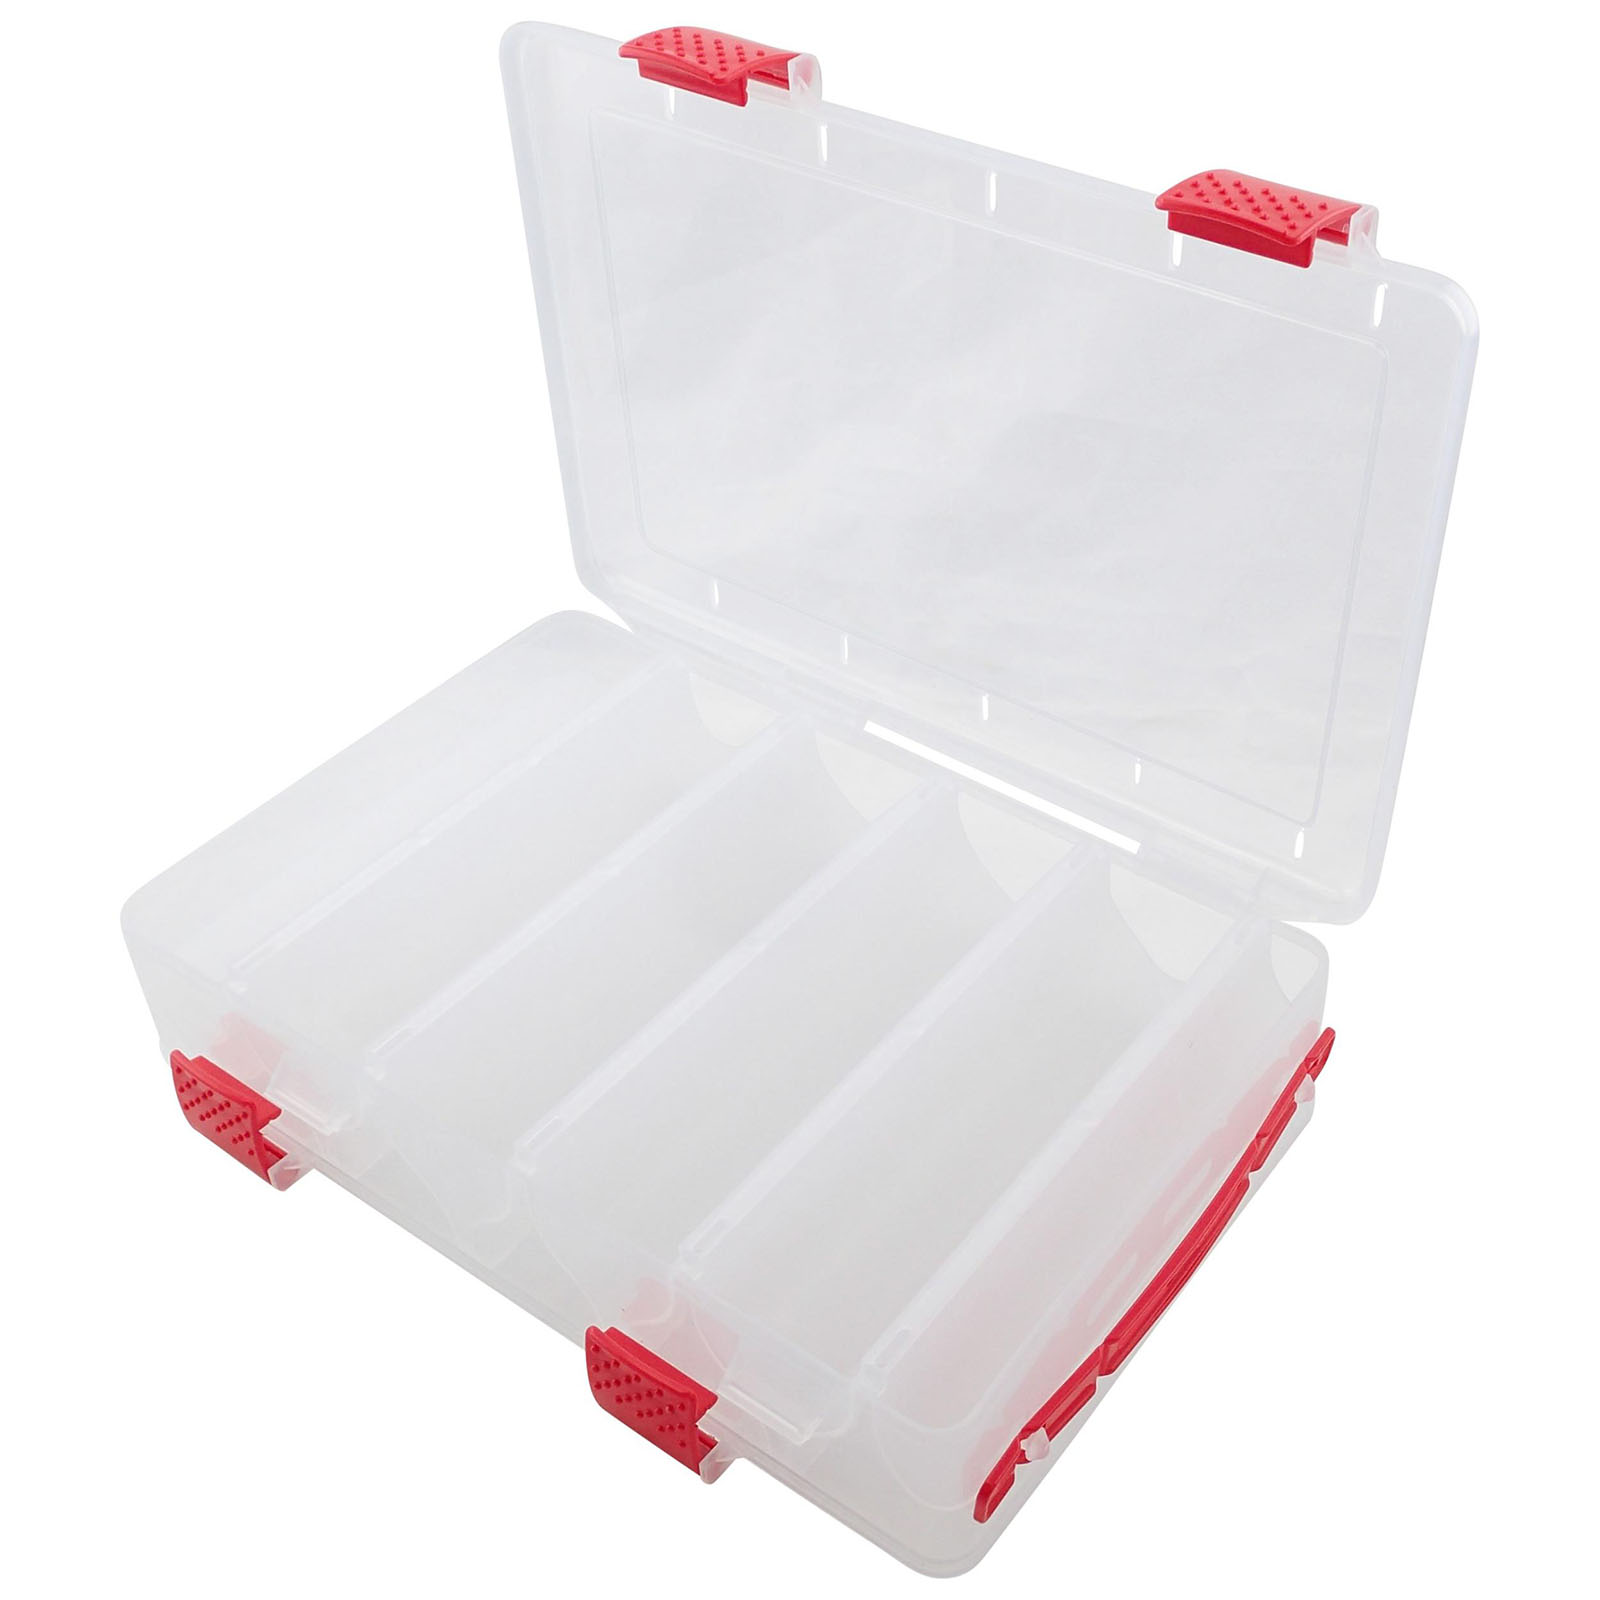 Amish Outfitters Double-Sided Crankbait Tackle Box Size 14 Compartment